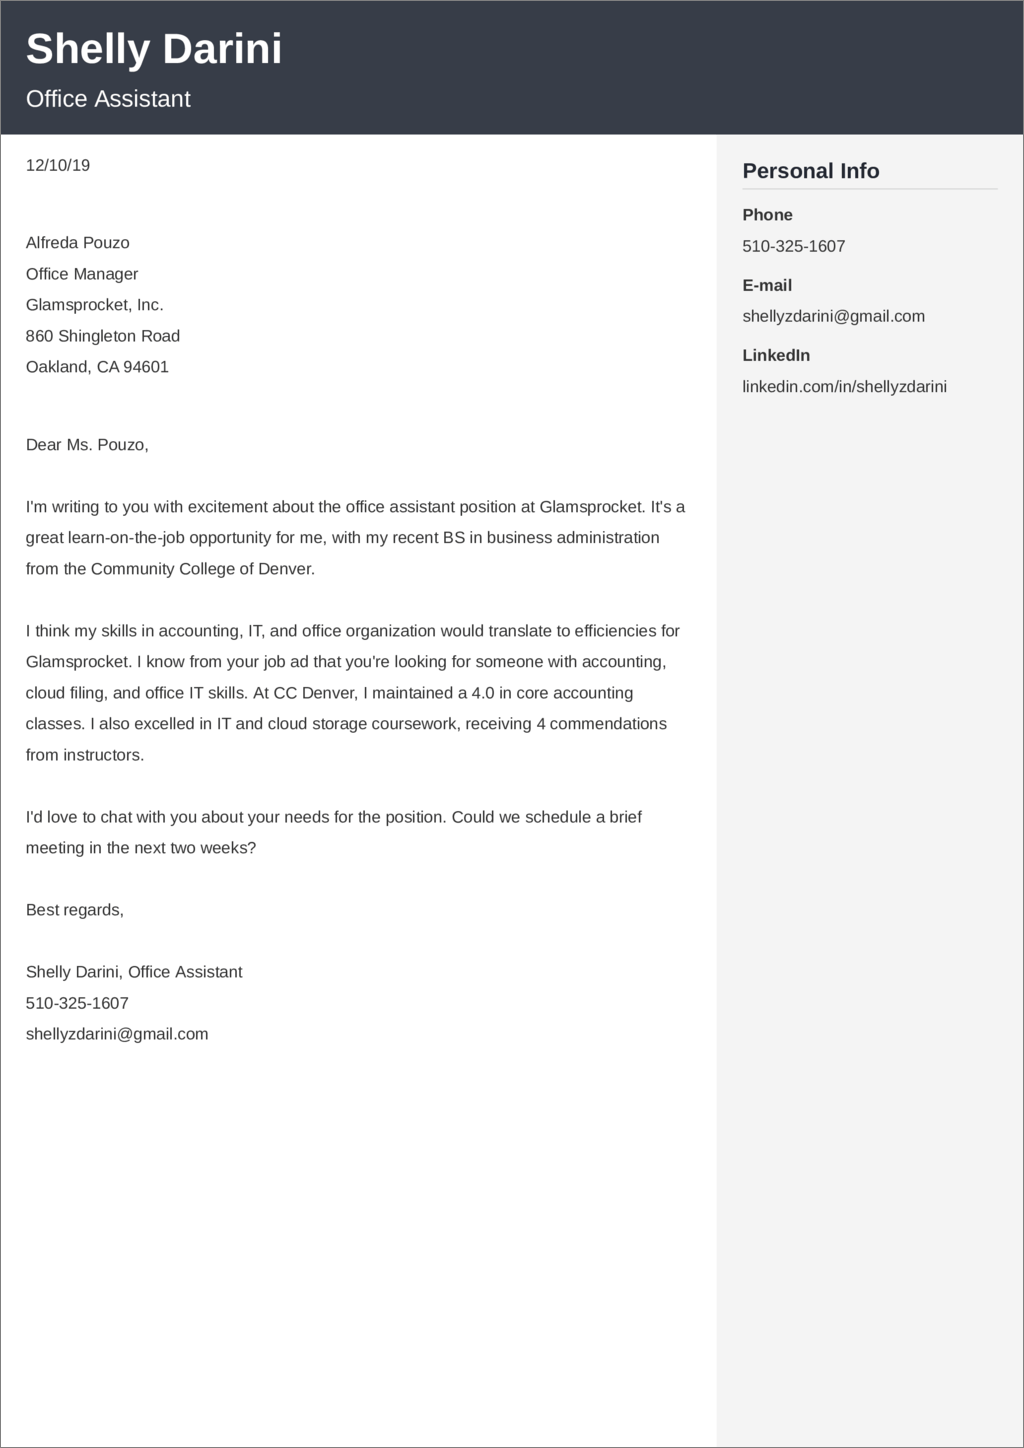 Office Assistant Cover Letter: Examples & Templates to Fill